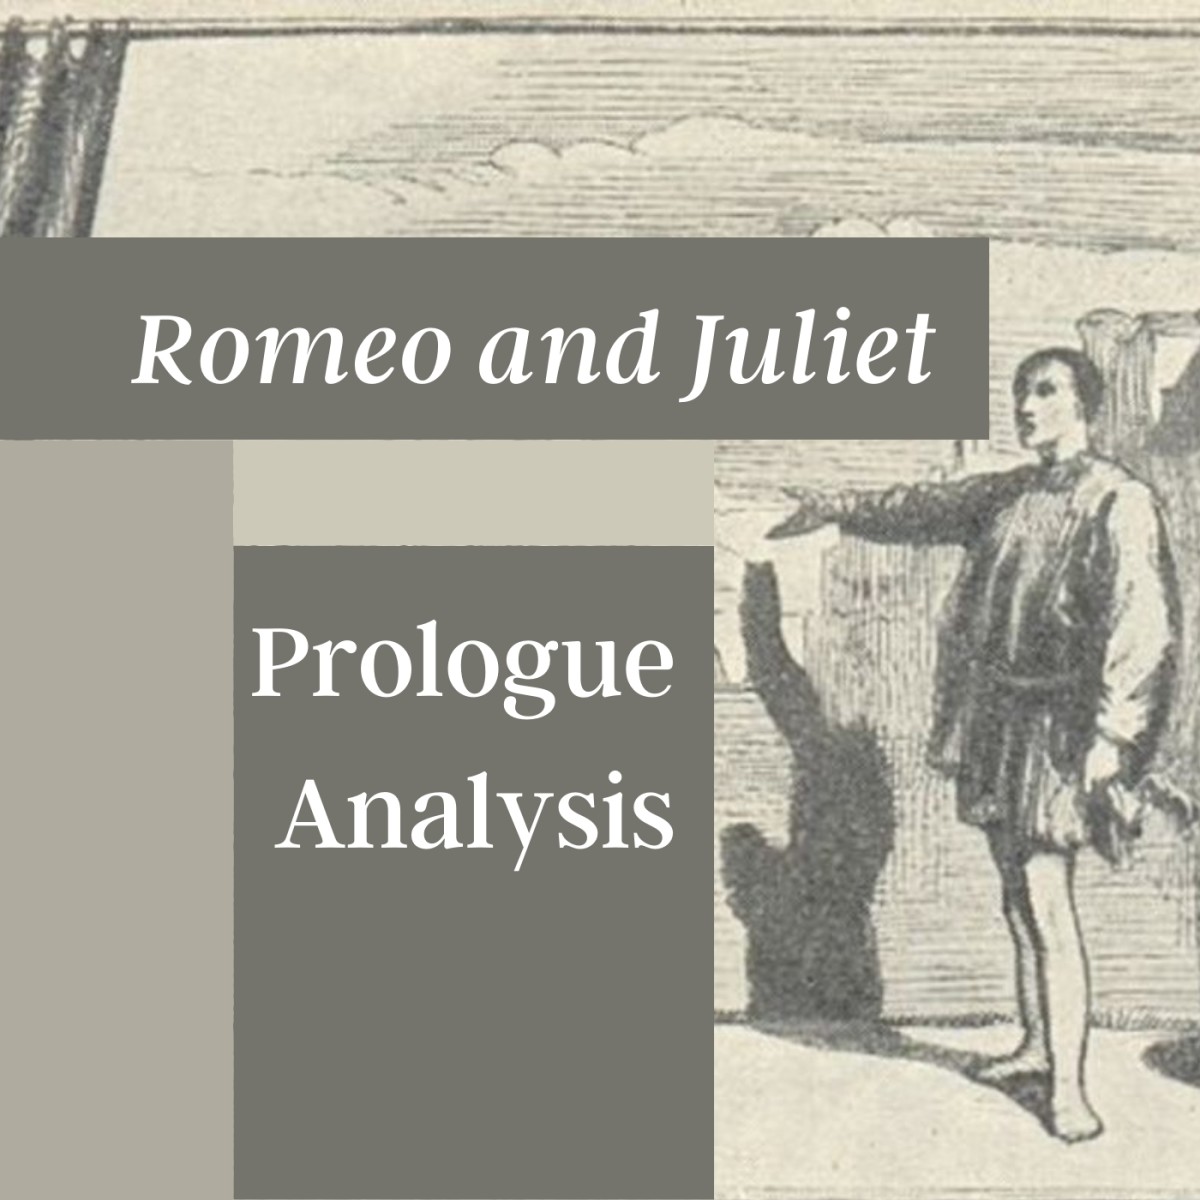 A line by line analysis of the prologue to Romeo and Juliet